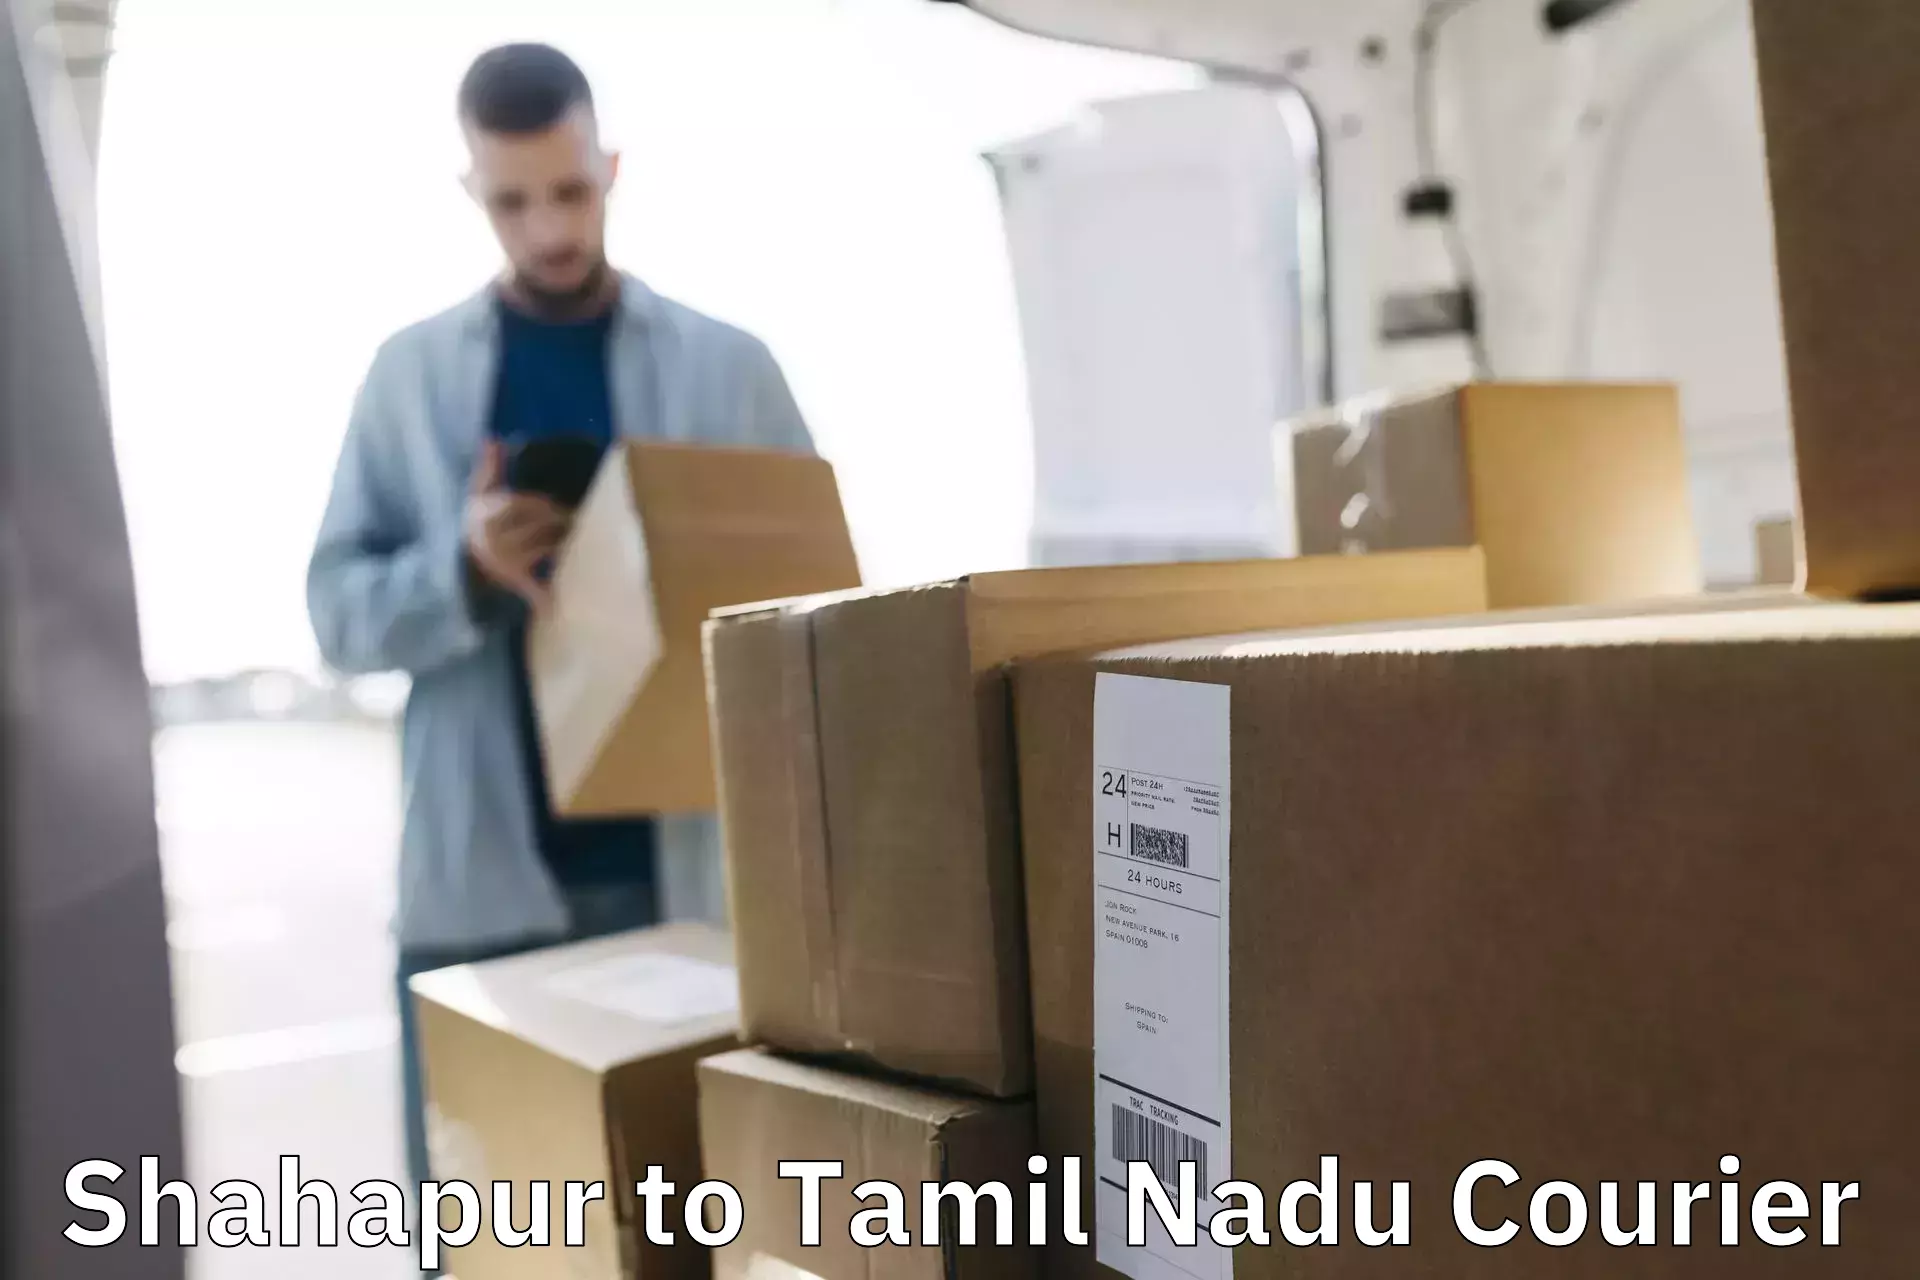 Courier service booking Shahapur to Puliampatti